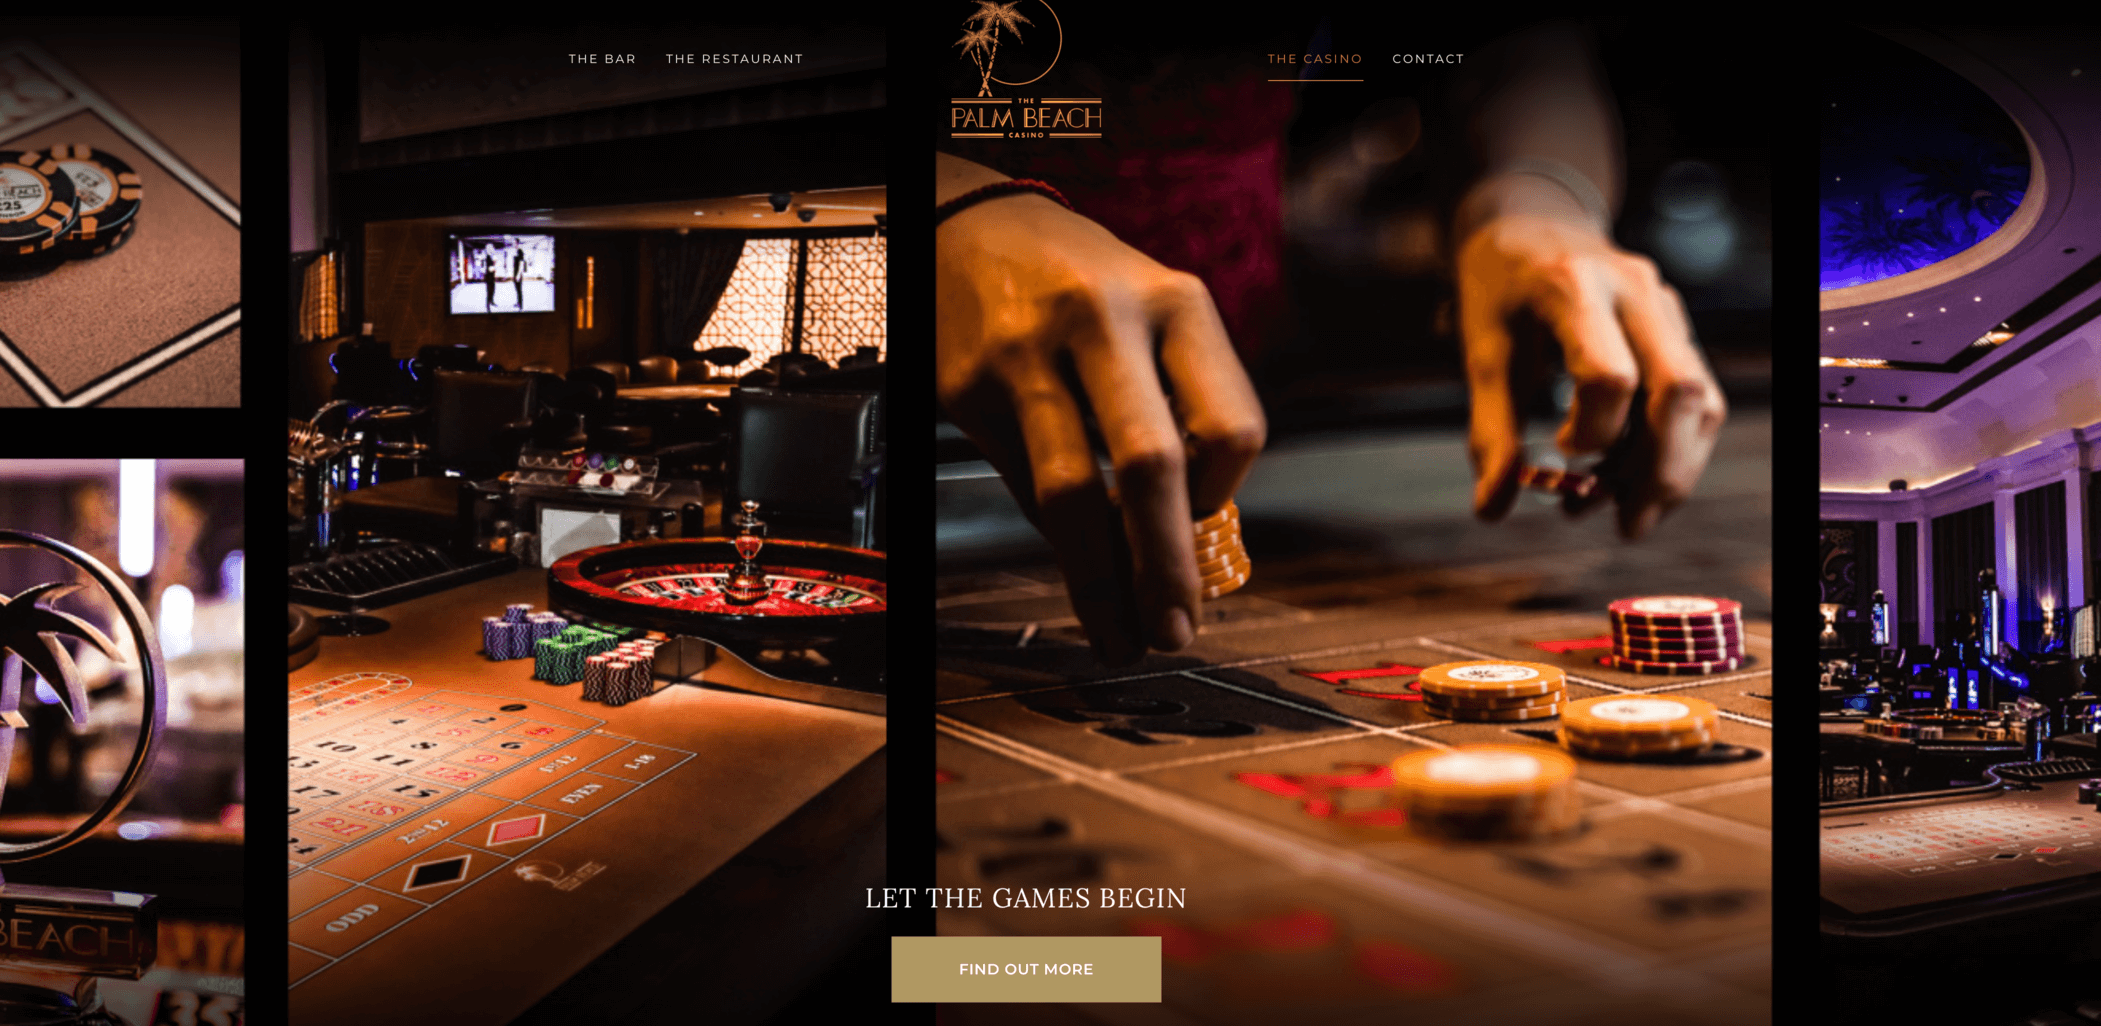 Luxury Gaming: Palm Beach Casino in the Heart of Mayfair, London